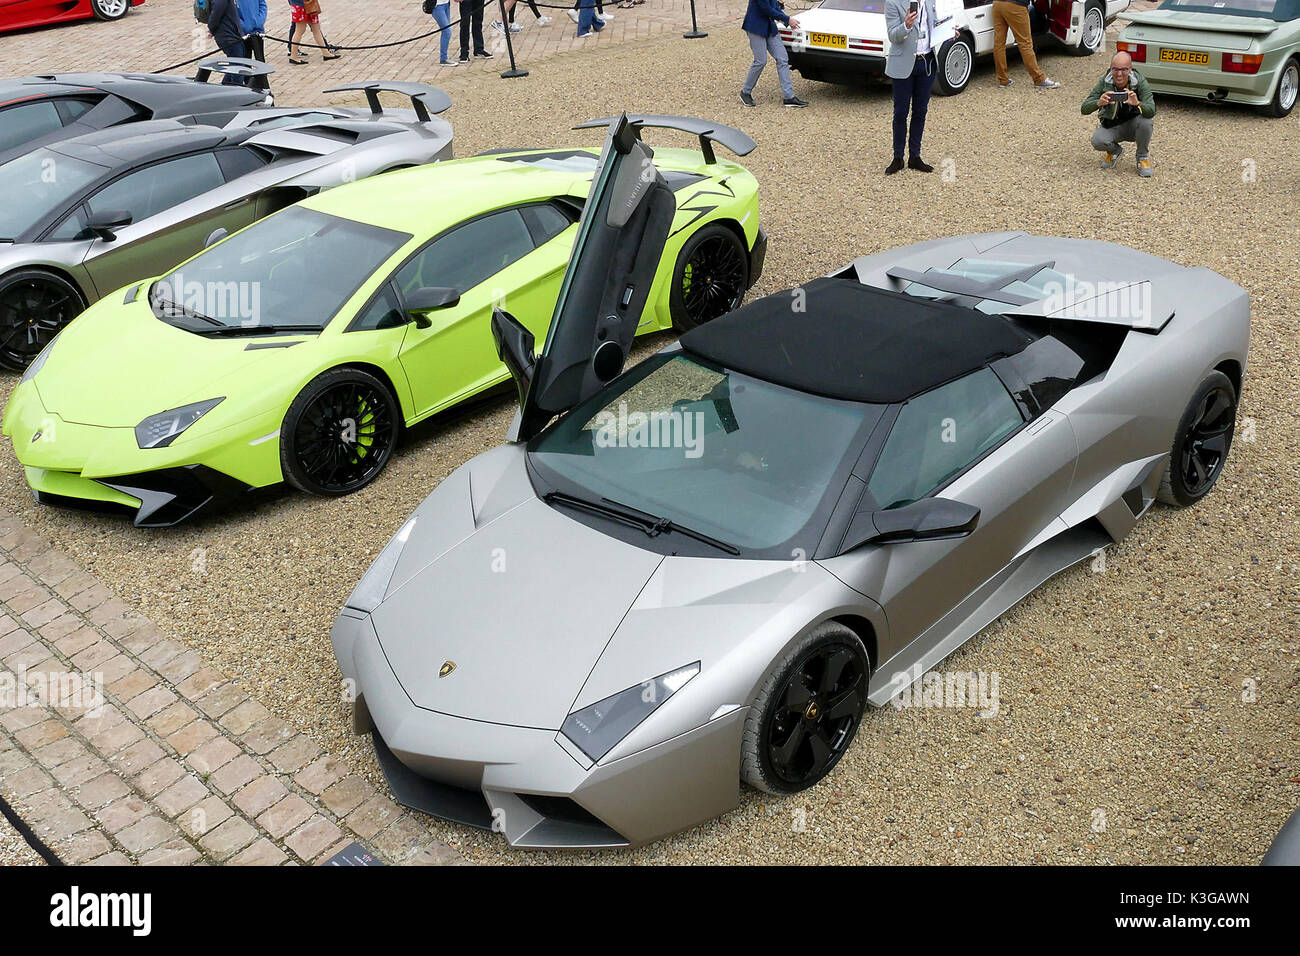 Blenheim Palace, Woodstock, Oxfordshire, UK. 03rd Sep, 2017. A 2010 Lamborghini Reventon Roadster - one of hiundreds of supercars on show at Blenheim Palace in Oxfordshire Picture: Ric Mellis 3/9/2017 Blenheim Palace, Woodstock, Oxfordshire Credit: Ric Mellis/Alamy Live News Stock Photo